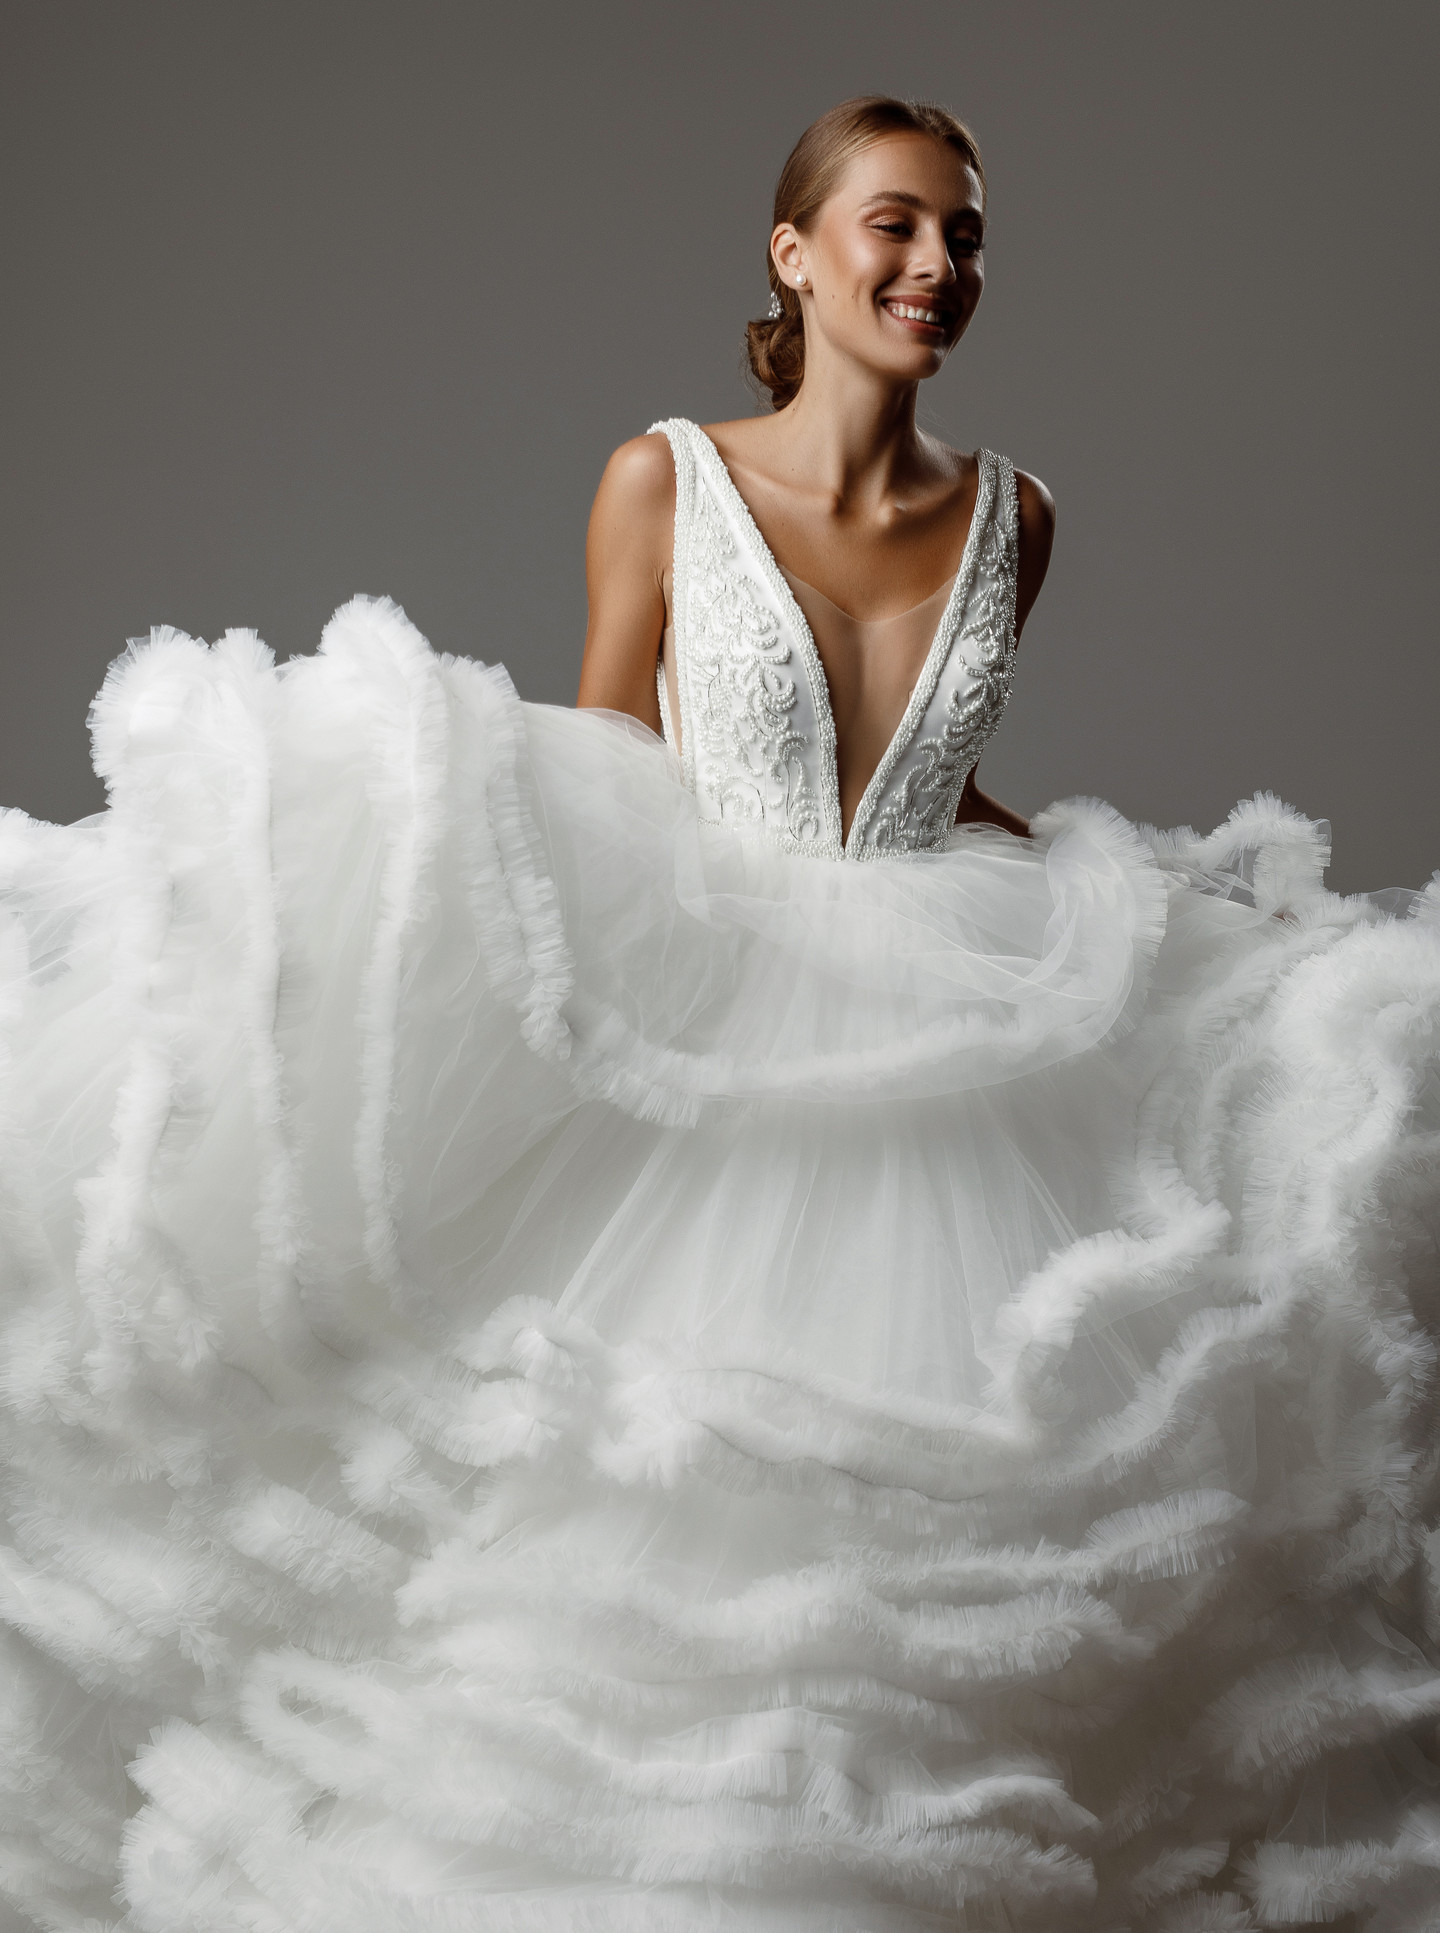 Amelie gown, 2020, couture, dress, bridal, off-white, tulle, embroidery, A-line, train, archive